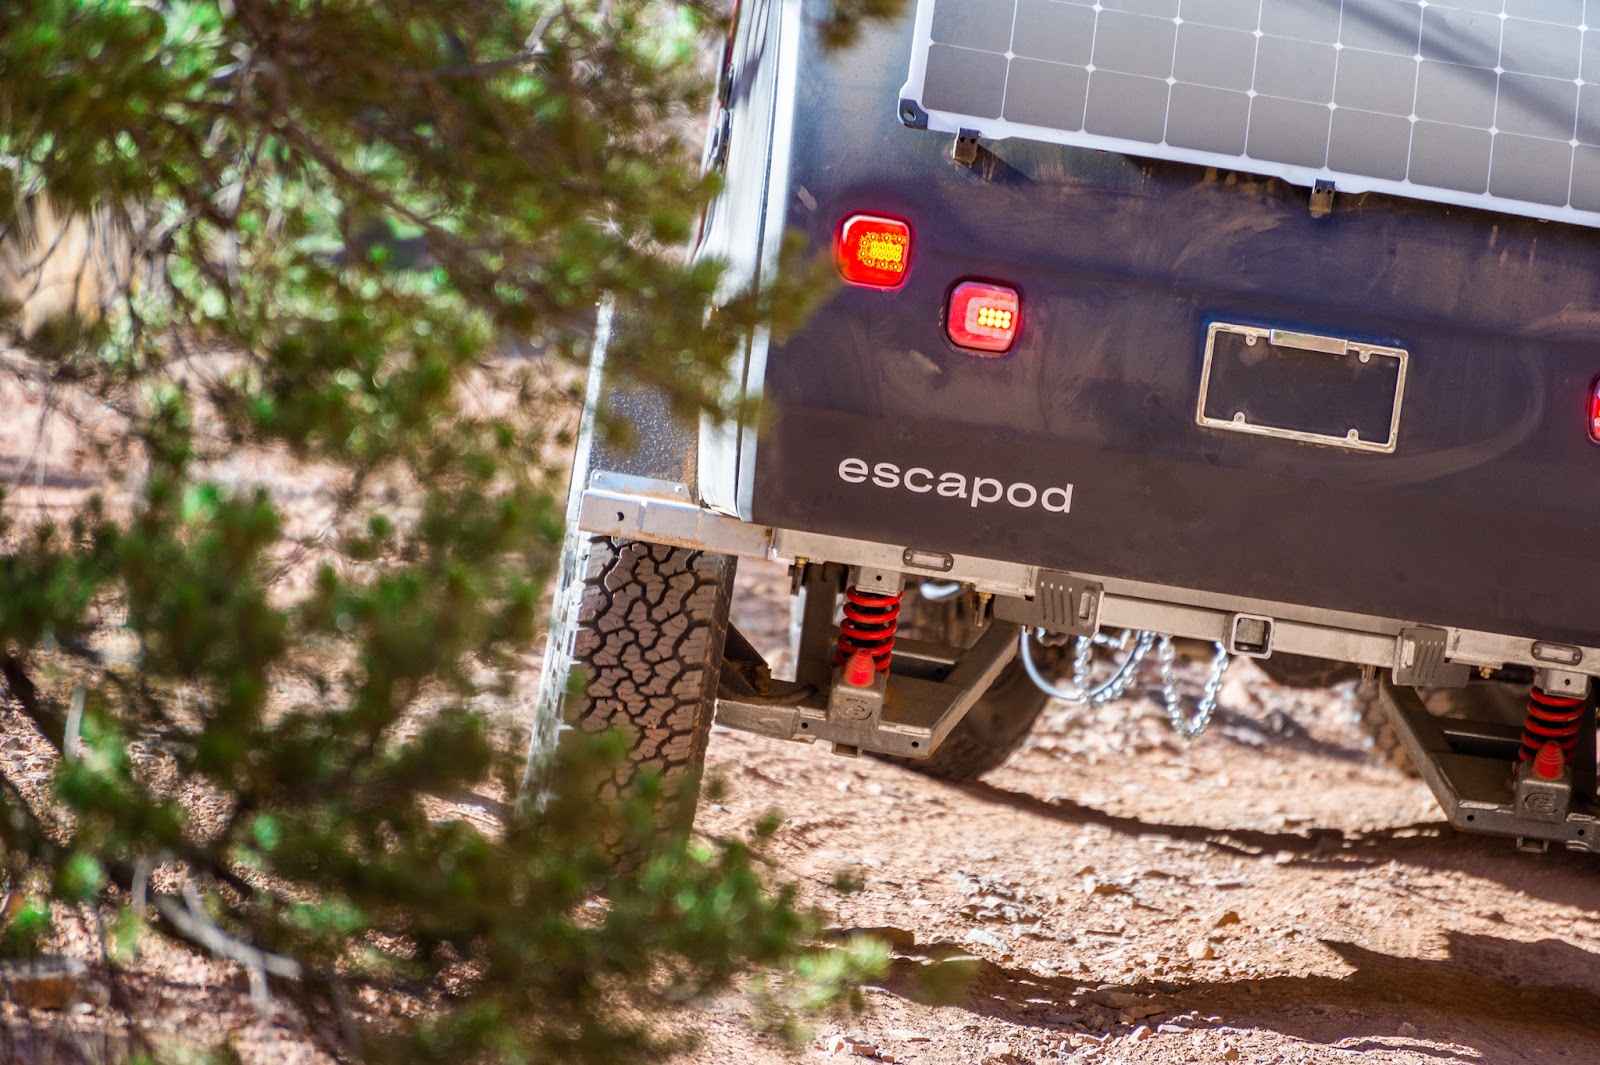 Escaped trailers, teardrop trailers, escaped teardrop, off-road trailers, overland trailers, escaped TOPO2, overlanding, overland, off-road, off-roading, vehicle supported adventure, 